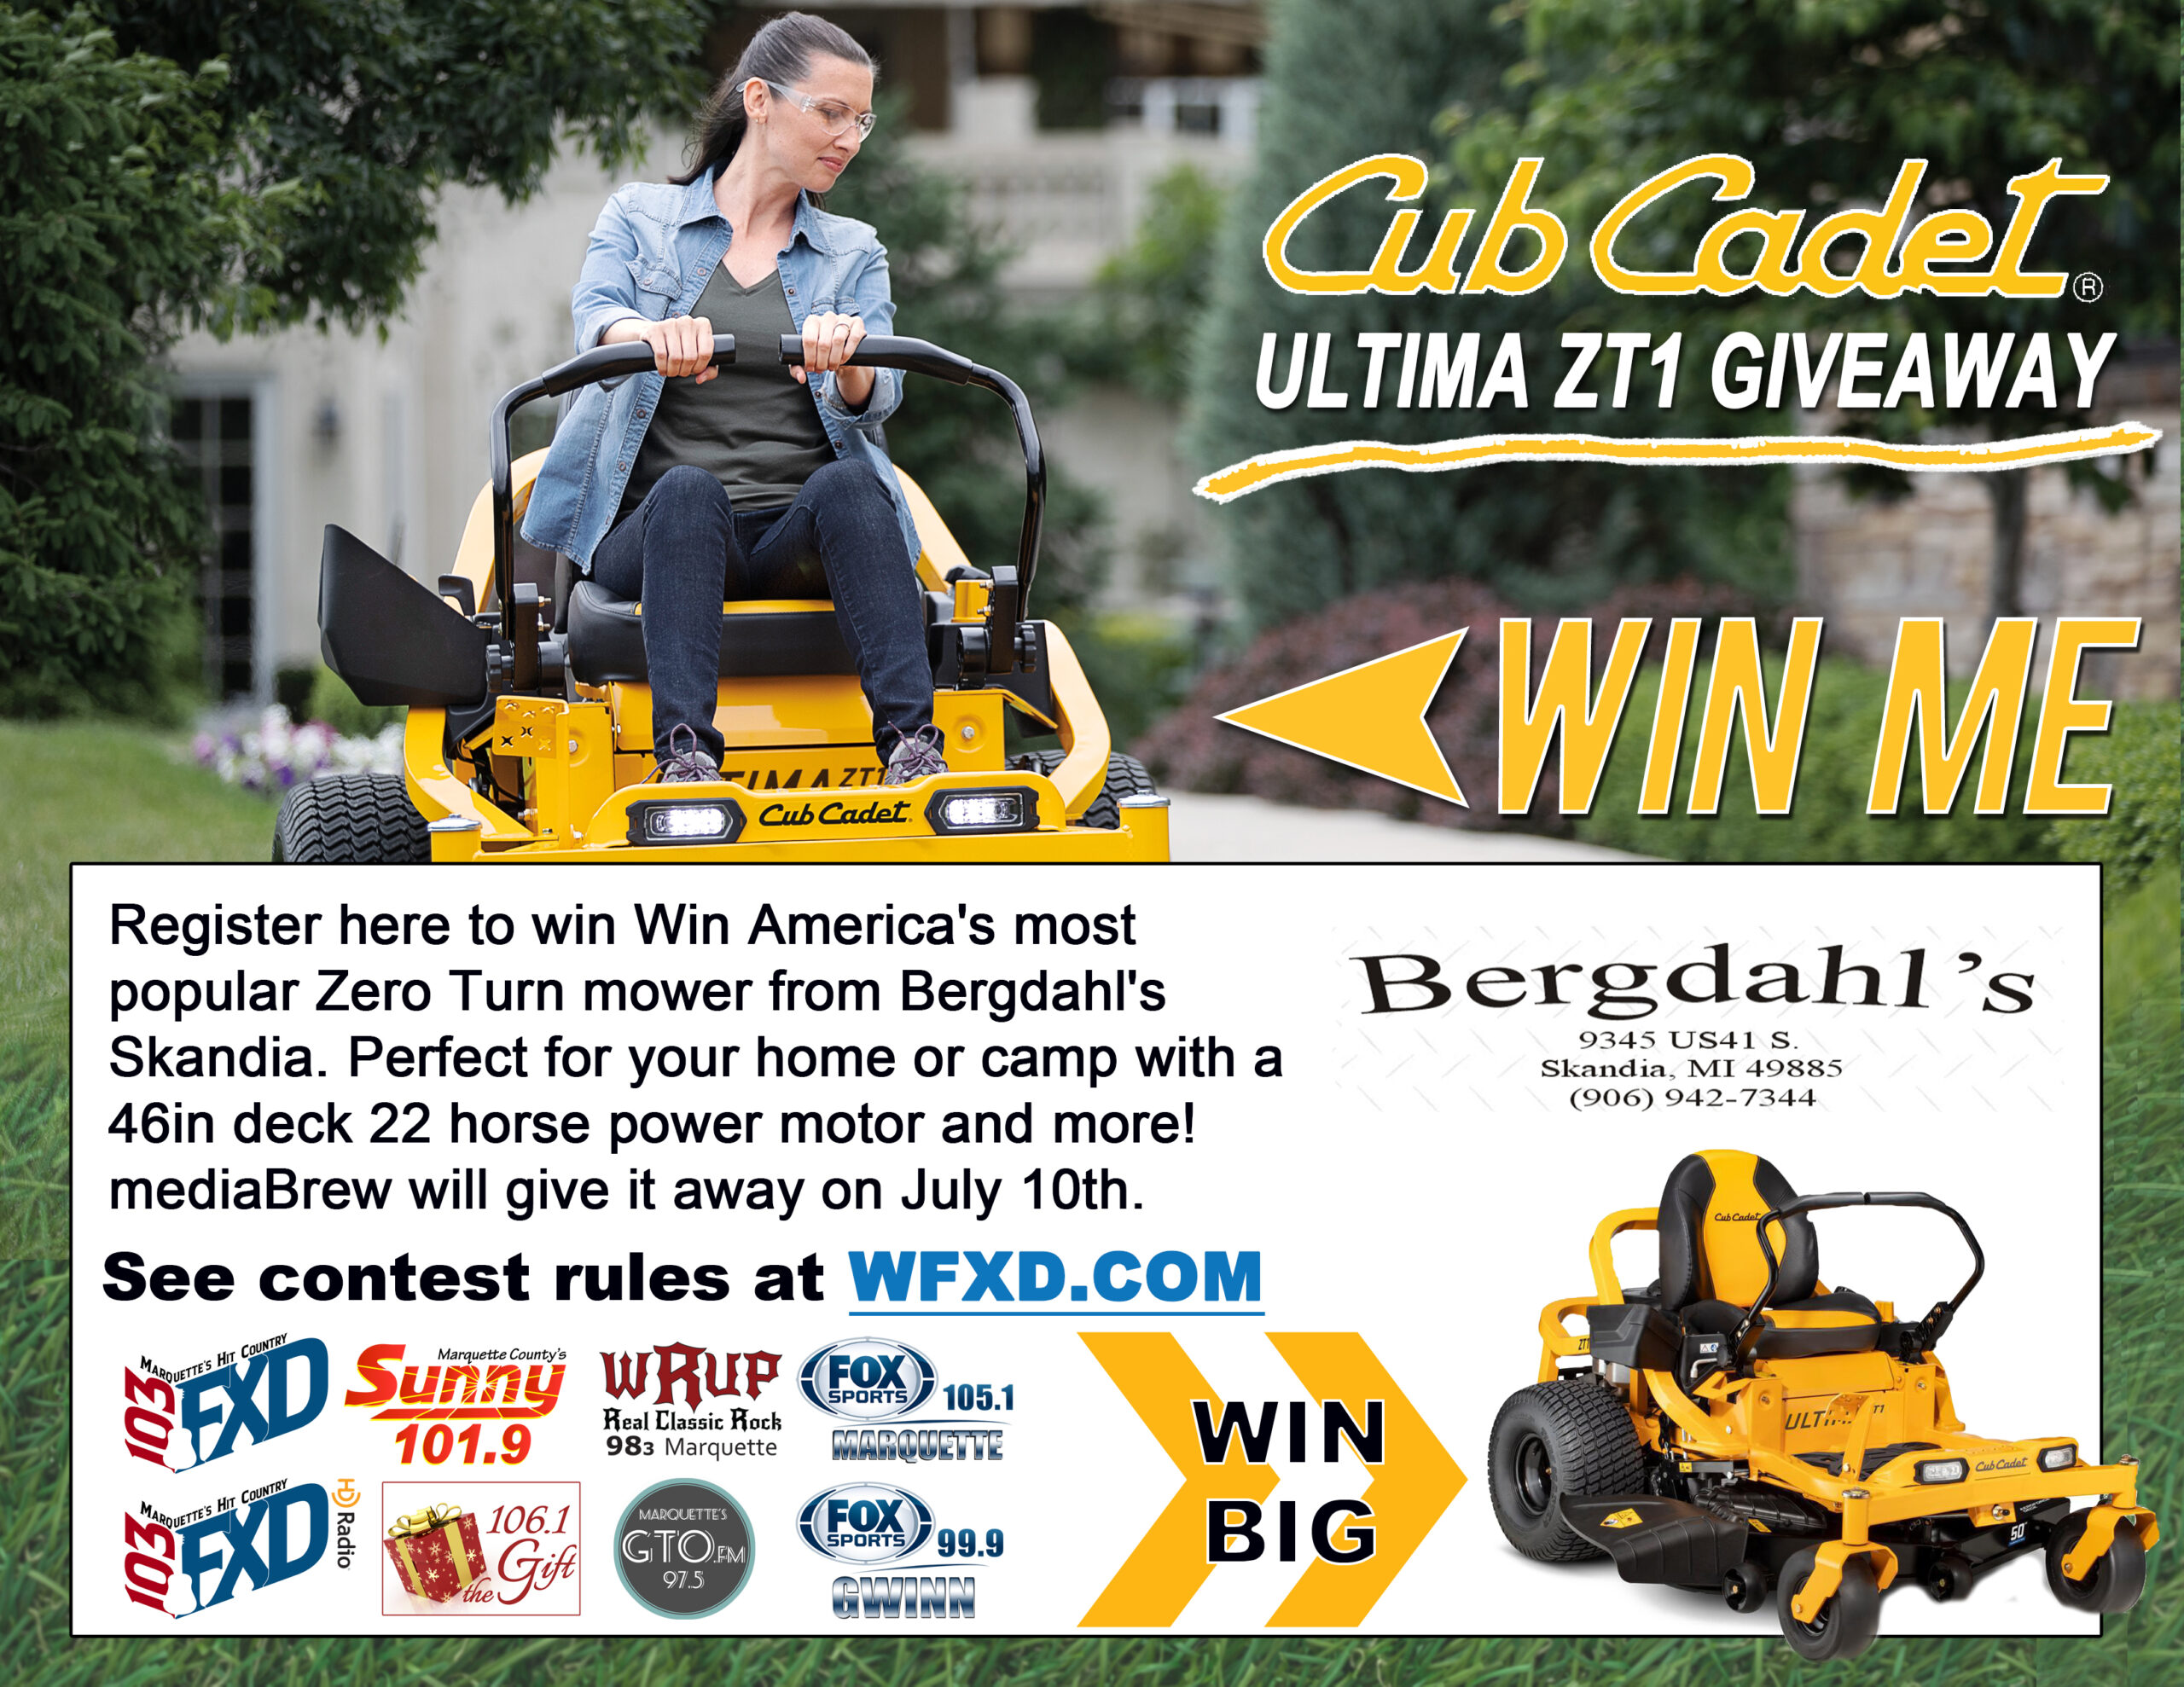 Enter for a chance to win the Cub Cadet Ultima ZT1 mower!